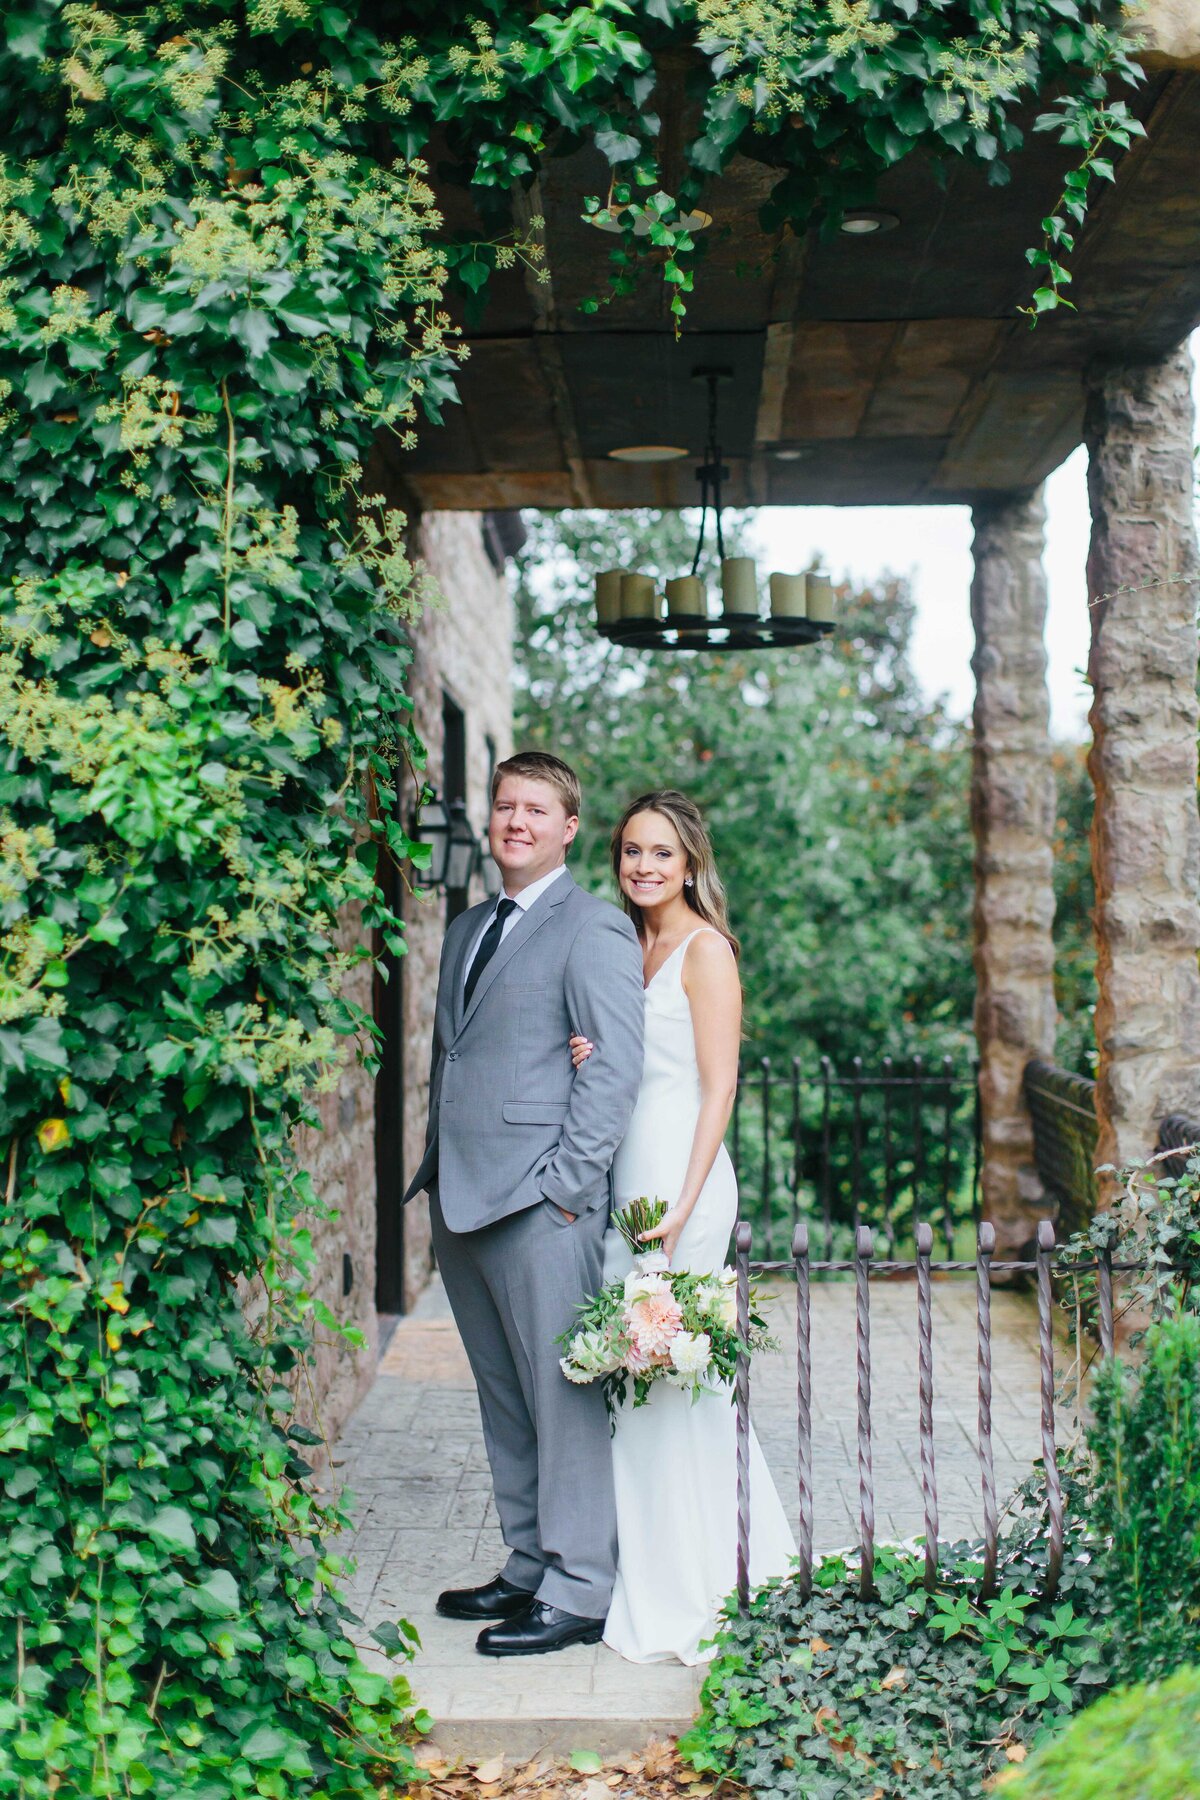 Chateau Selah wedding venue blountville tn photography bride and groom smiling